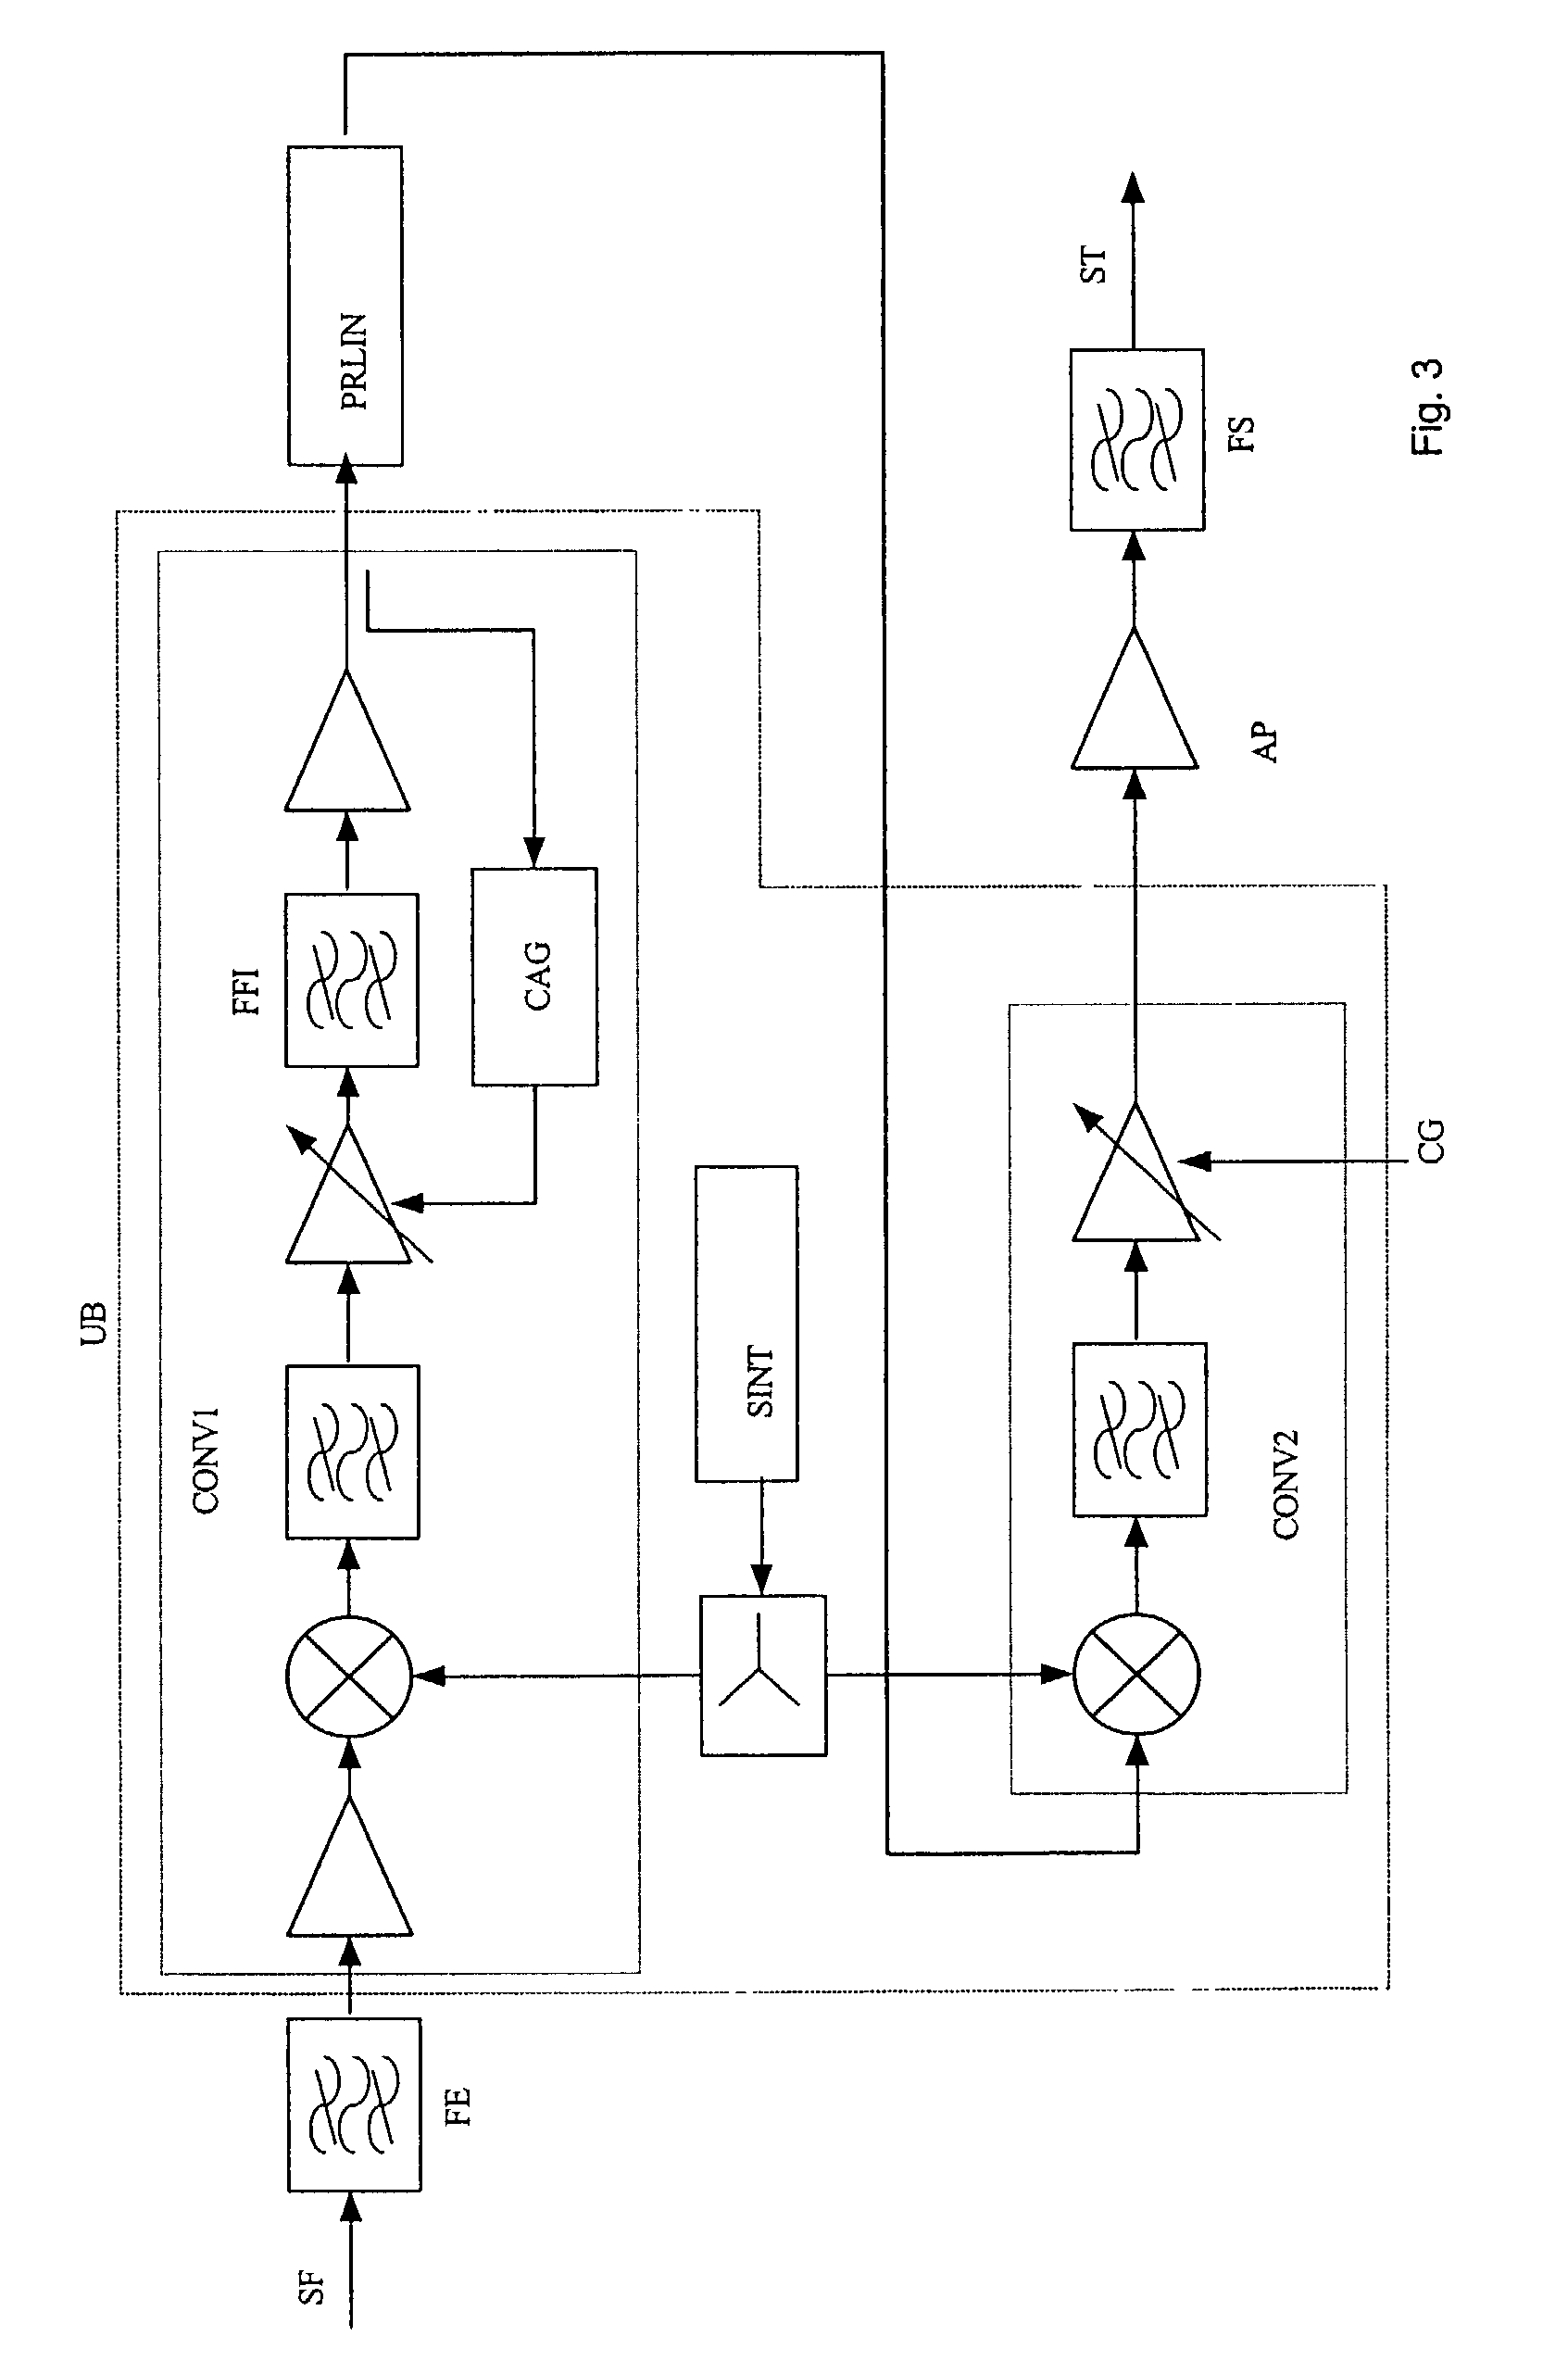 Process for re-transmitting single frequency signals and a single frequency signal repeater